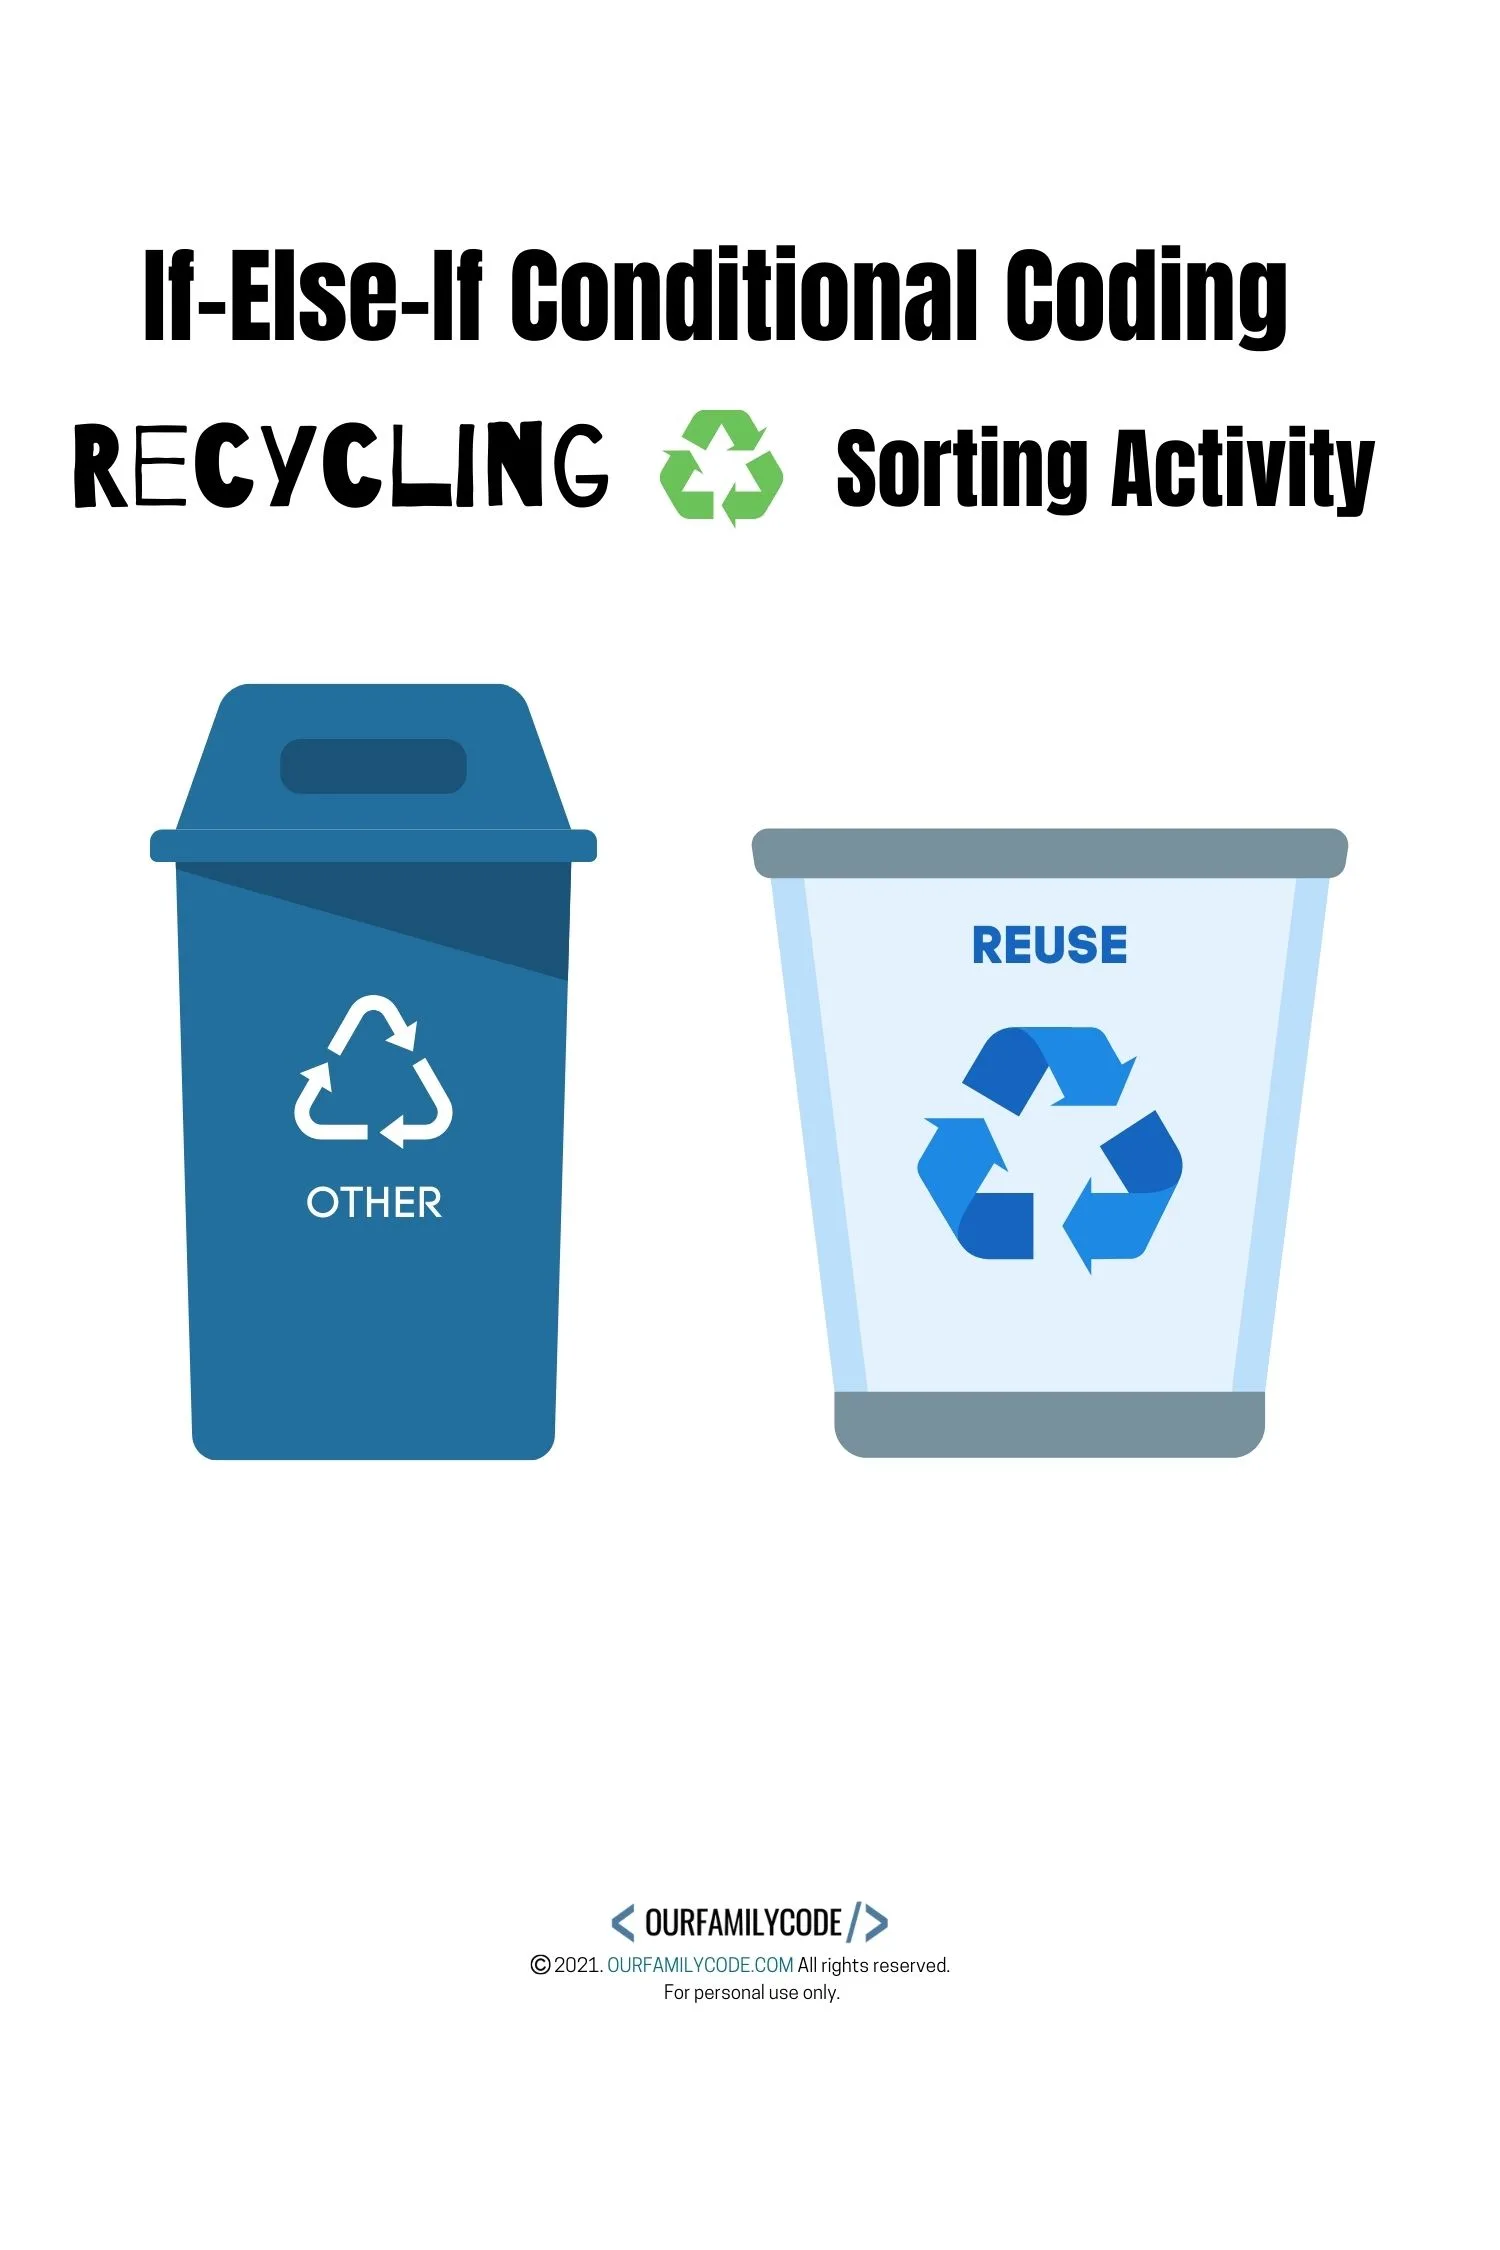 A picture of two recycling bins.